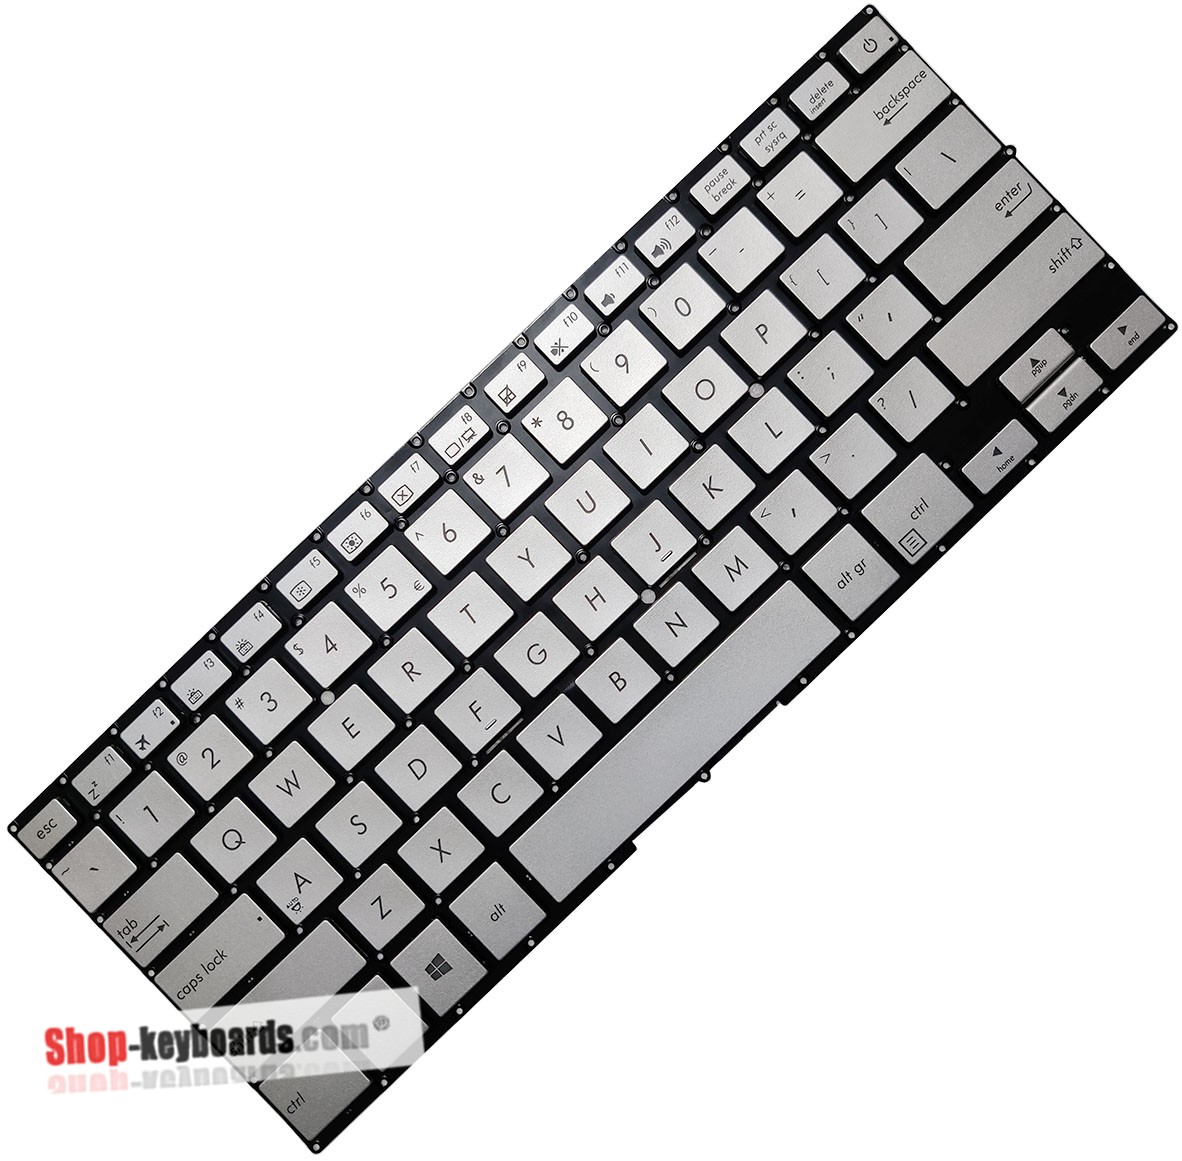 Asus 0KNB0-D620AR00 Keyboard replacement